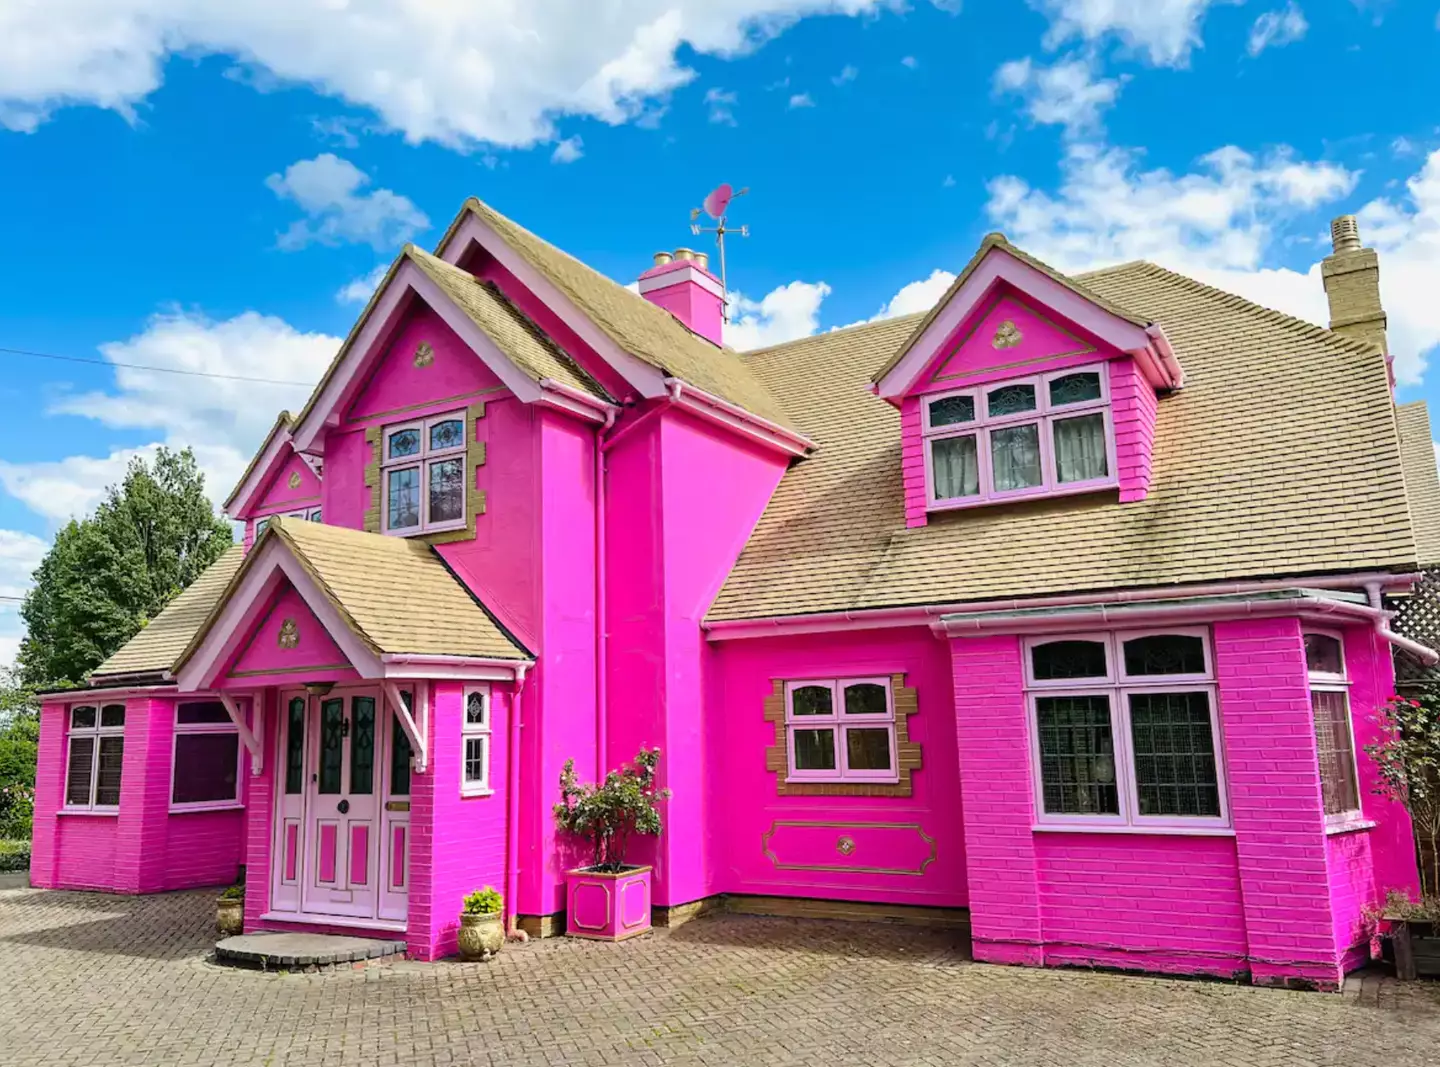 Say hello to The Pink House, also known as Eaton House Studio.